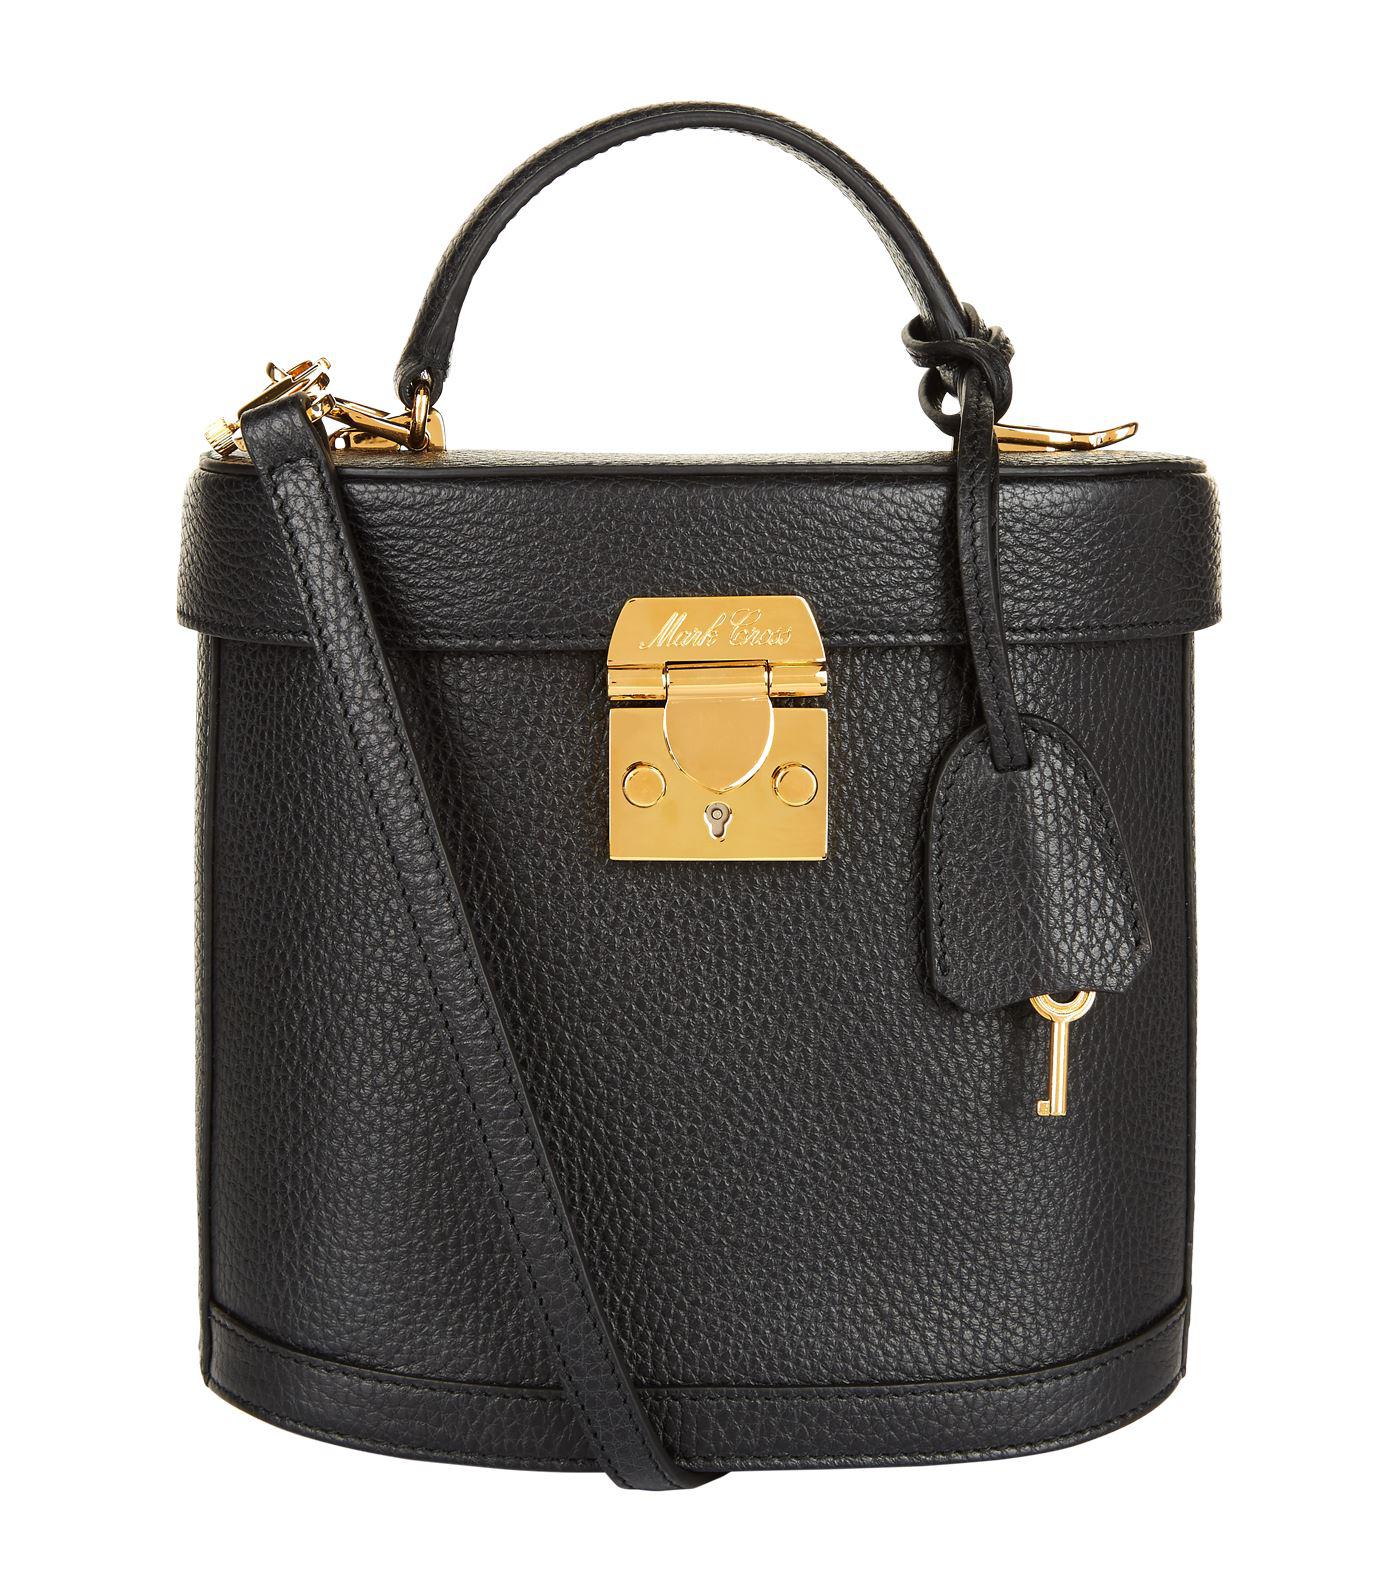 Lyst - Mark Cross Benchley Grained Leather Shoulder Bag in Black - Save 23%